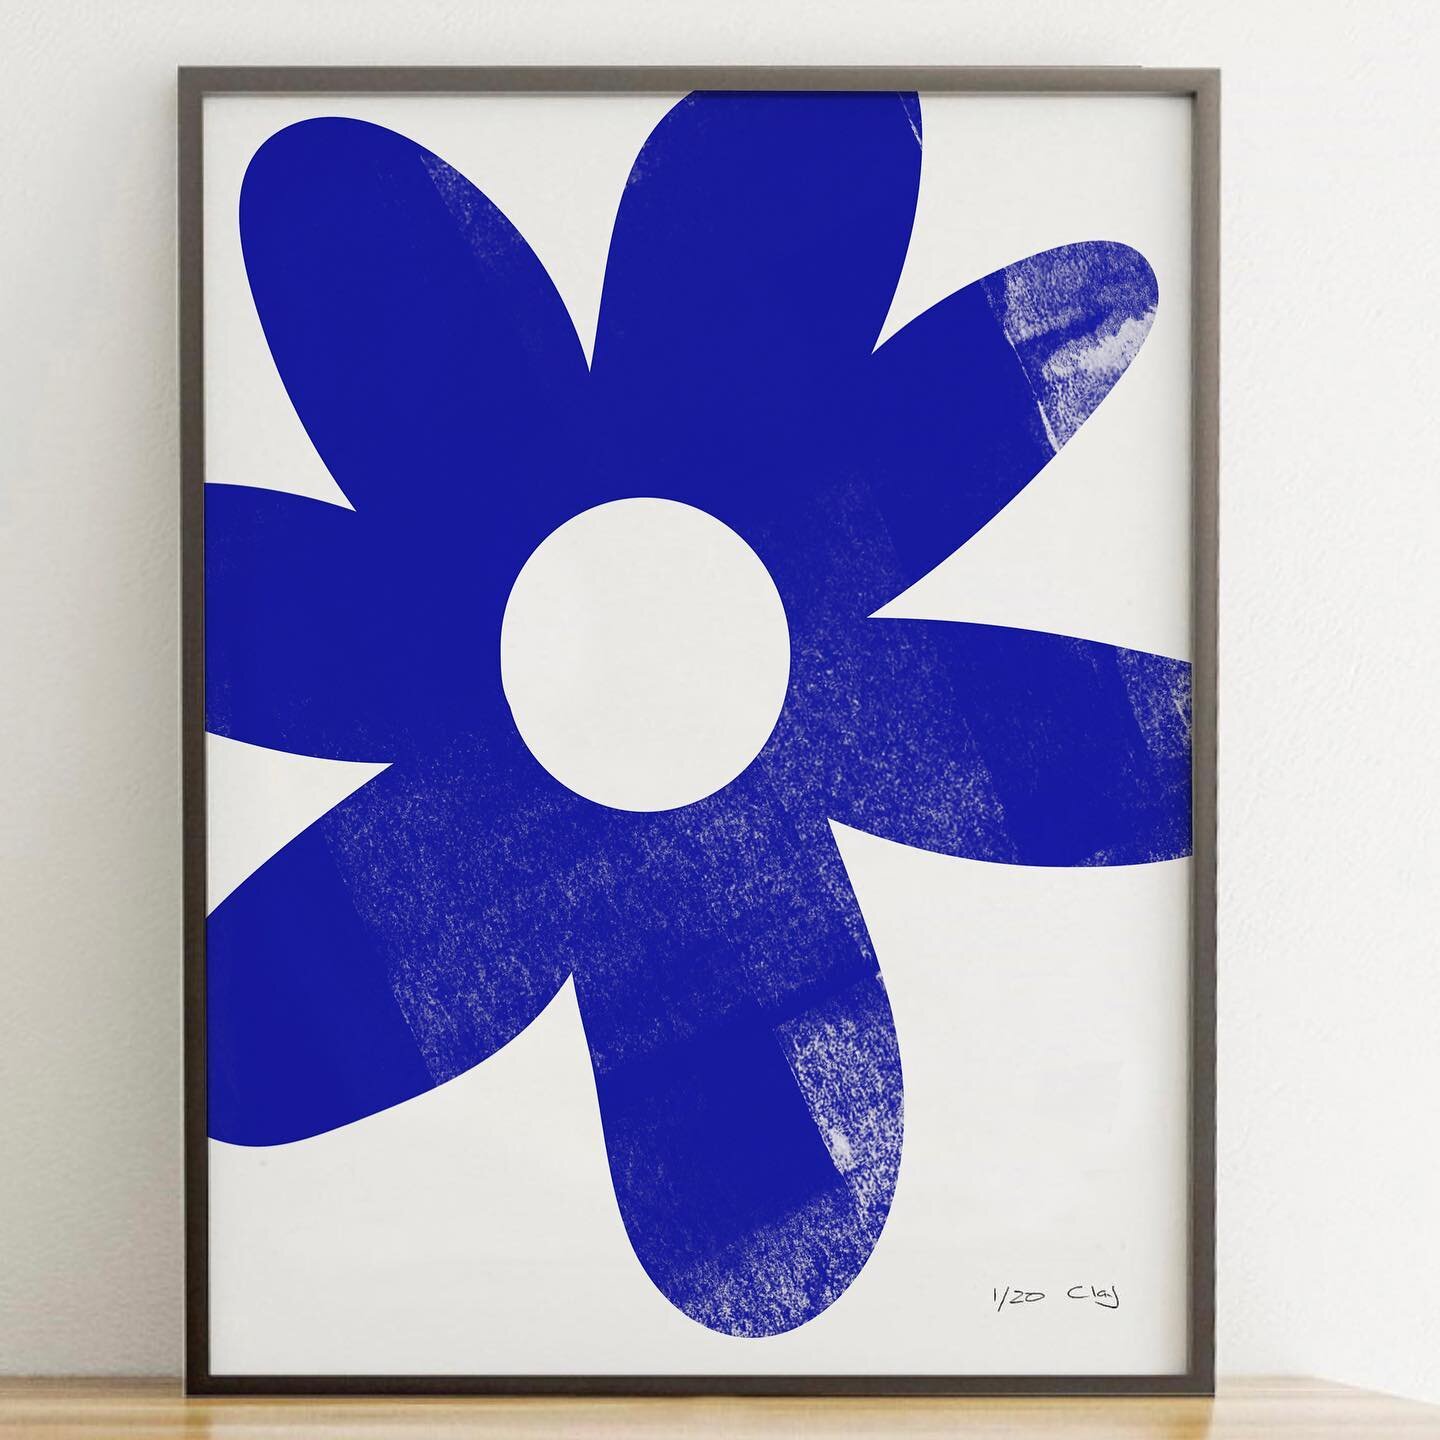 Flower Power No. 1 - today the Sydney weather is so beautiful, it feels like we&rsquo;ve had rain forever so the blue sky is so nice it made me want to create a little thank you to the power of nature. #creative #art #printmaker #flowers  #flowerpowe